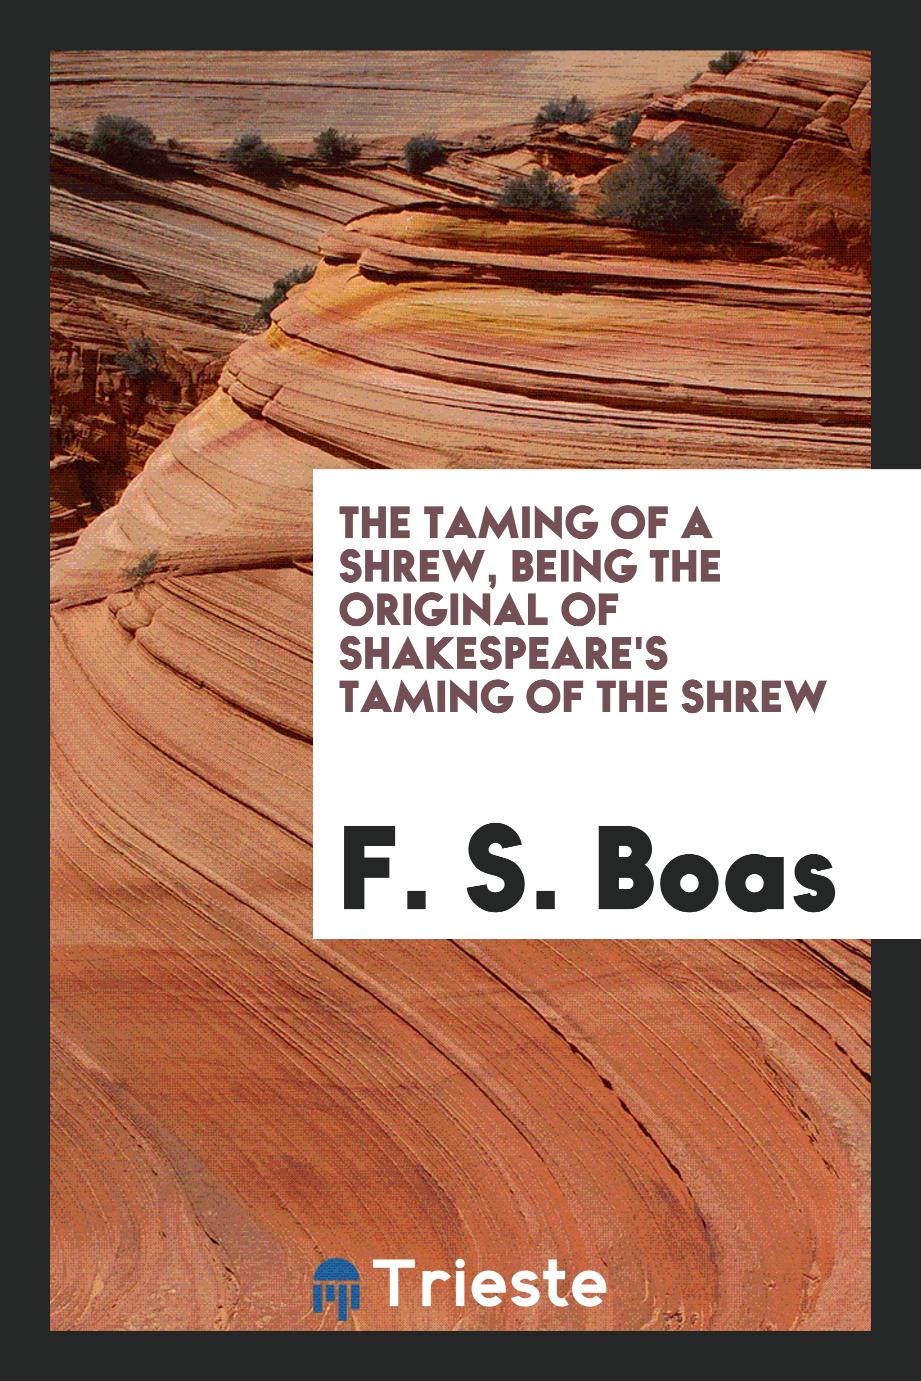 The taming of a shrew, being the original of Shakespeare's Taming of the shrew